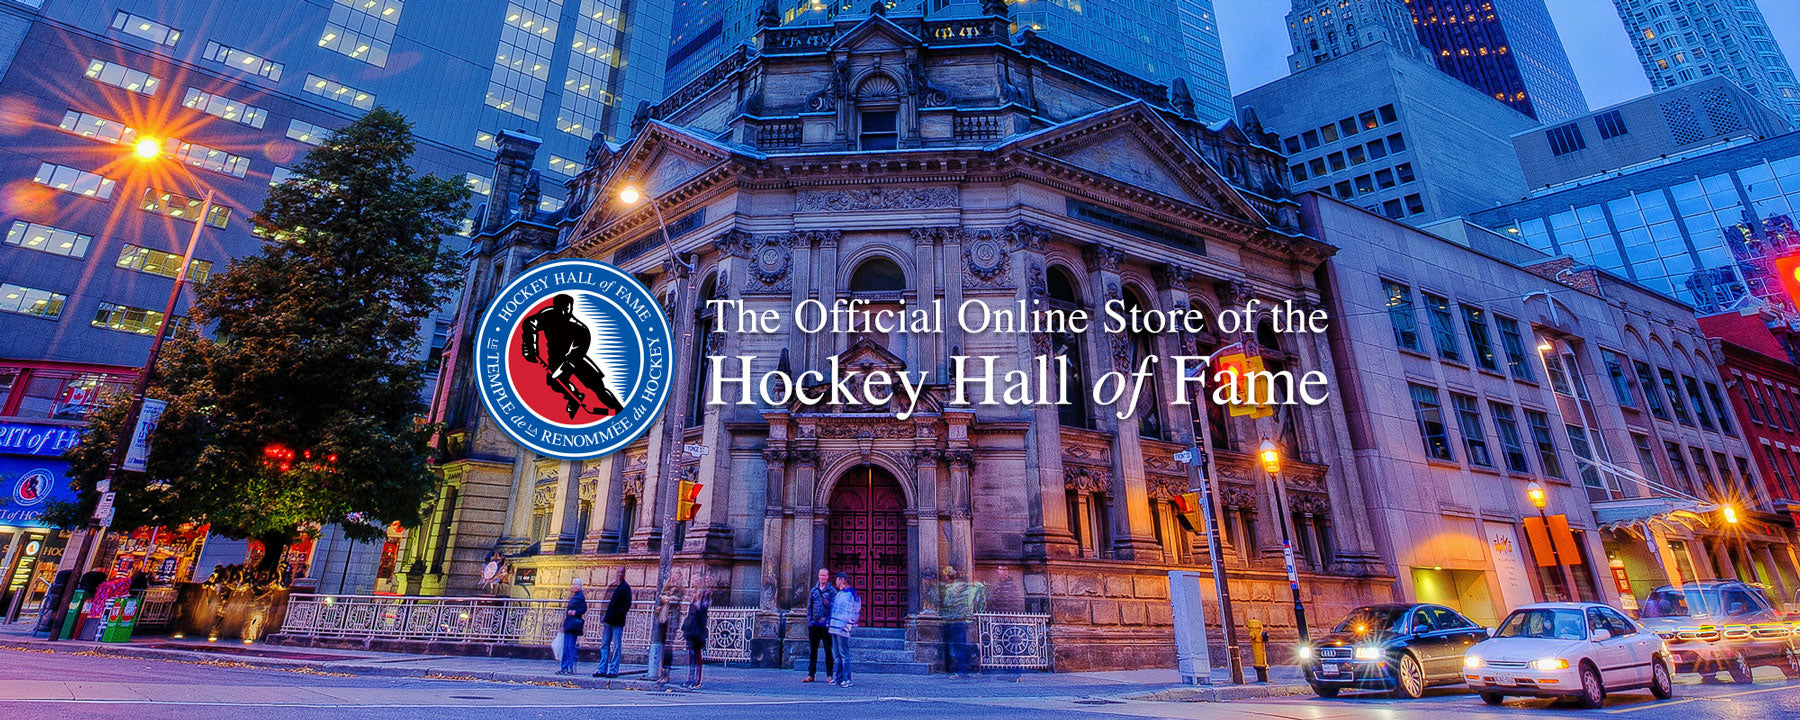 Toronto – July 2019 – Hall of Fame Hockey Jerseys (or Sweaters if